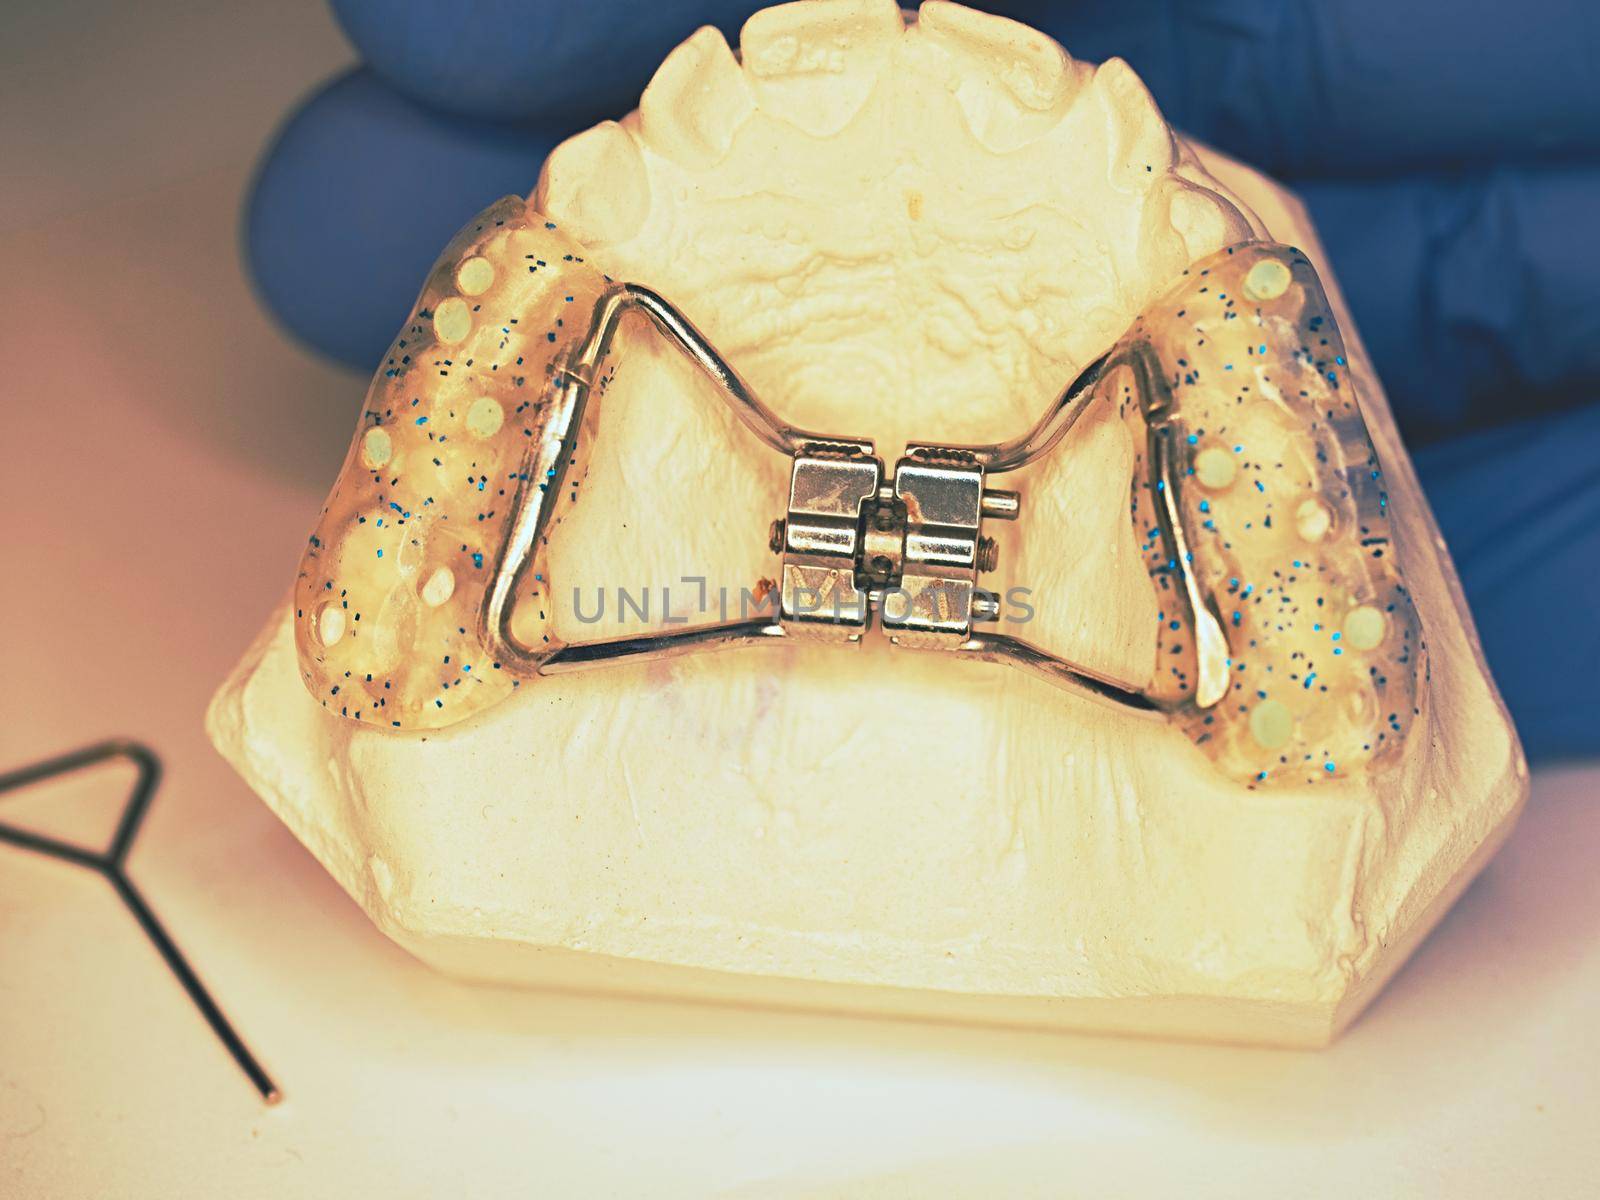 Hyrax braces wear on patient teeth gypsum model.  Dentist check exact setting before putting it on the patient upper palate.